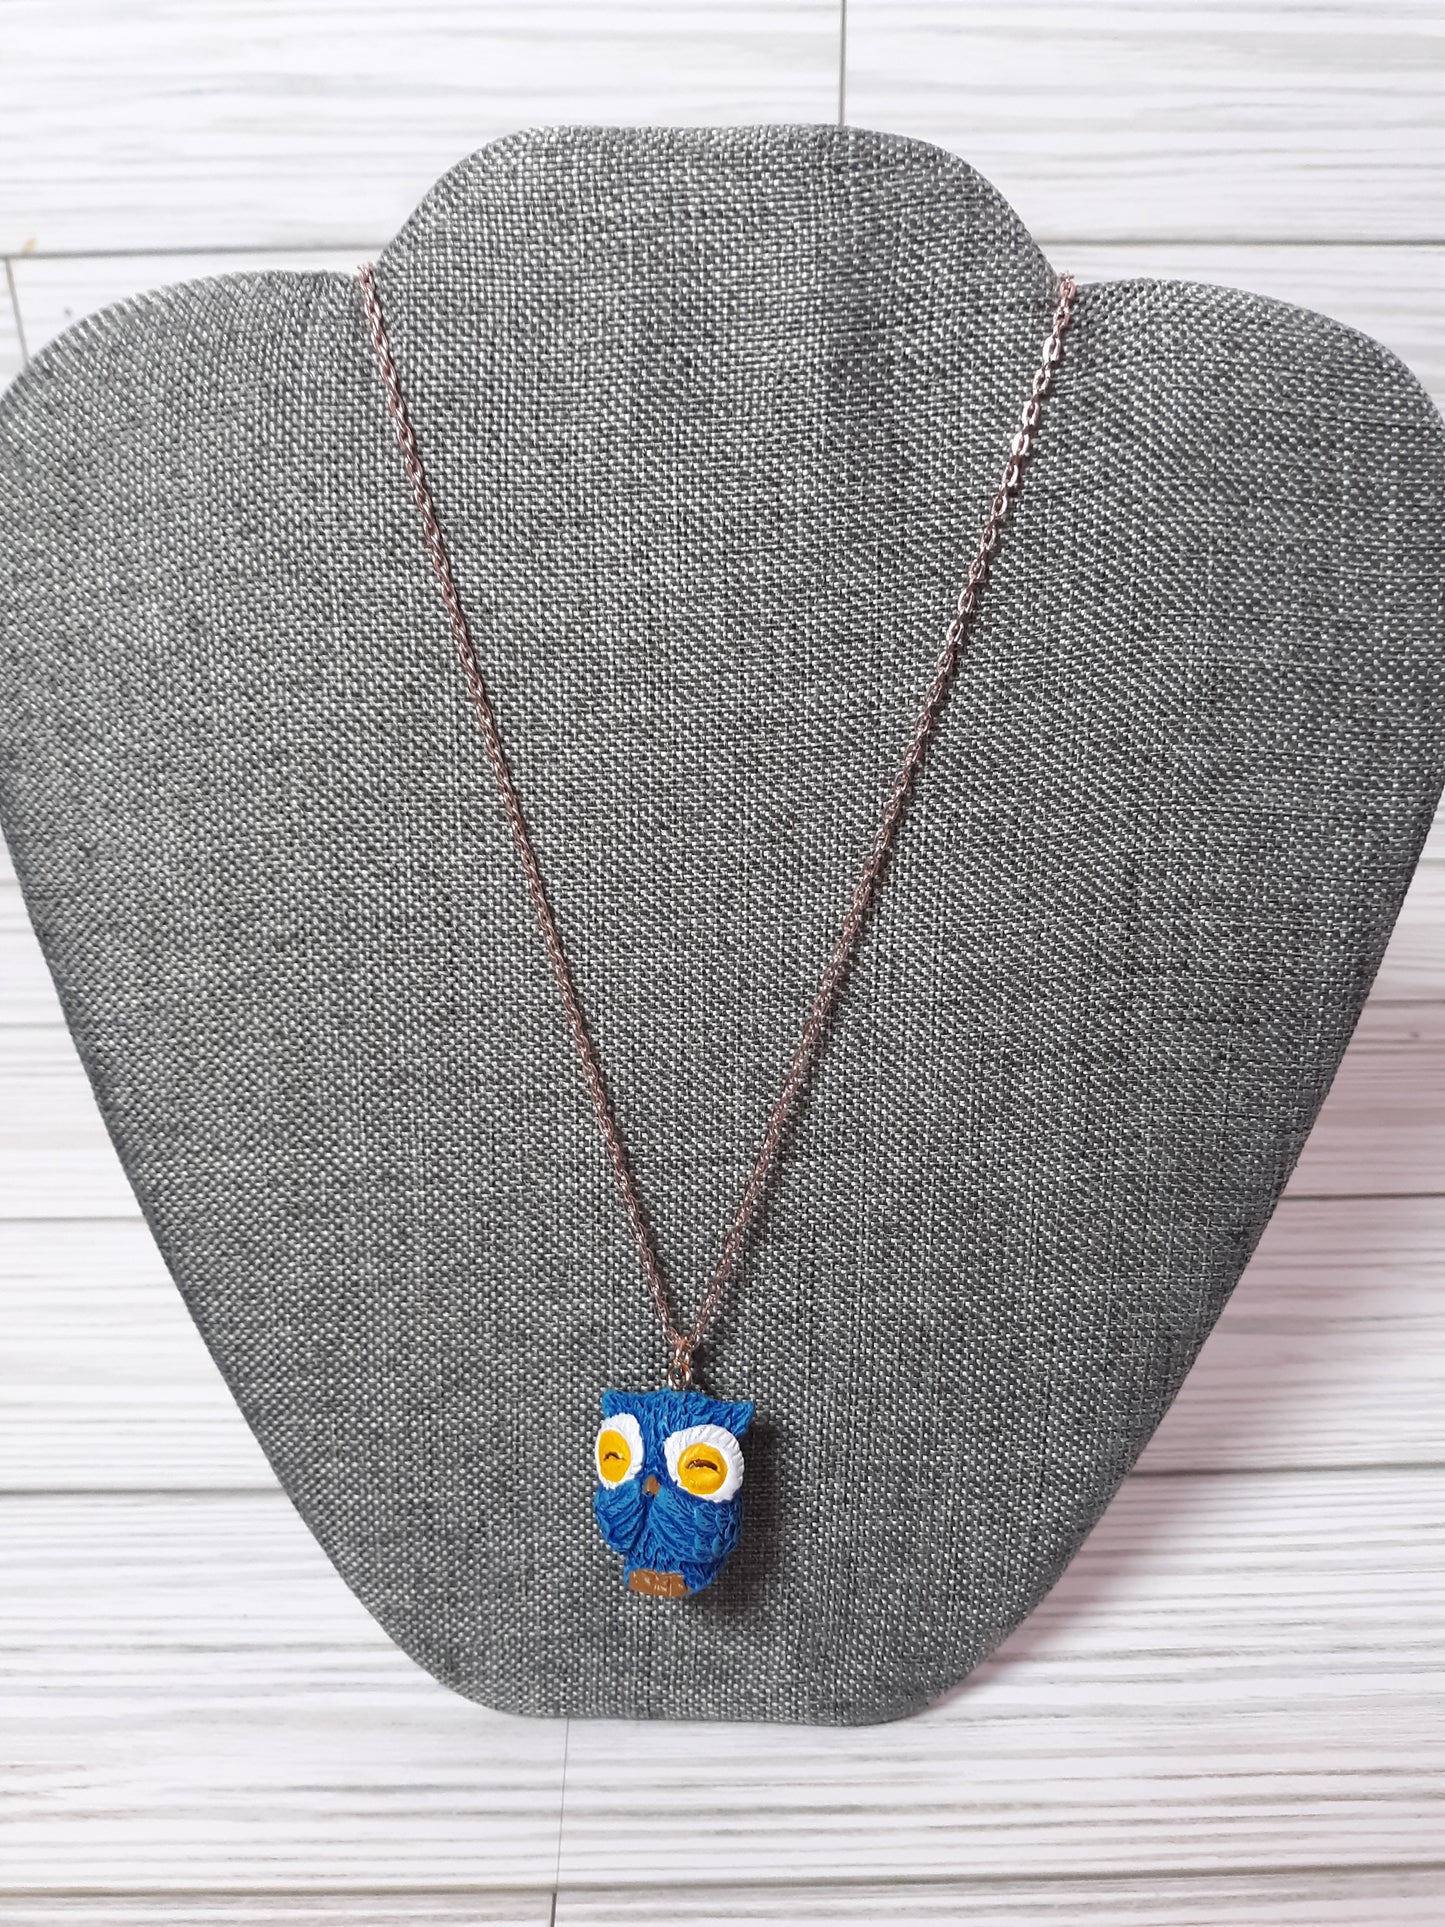 Sweet Blue Owl Necklace